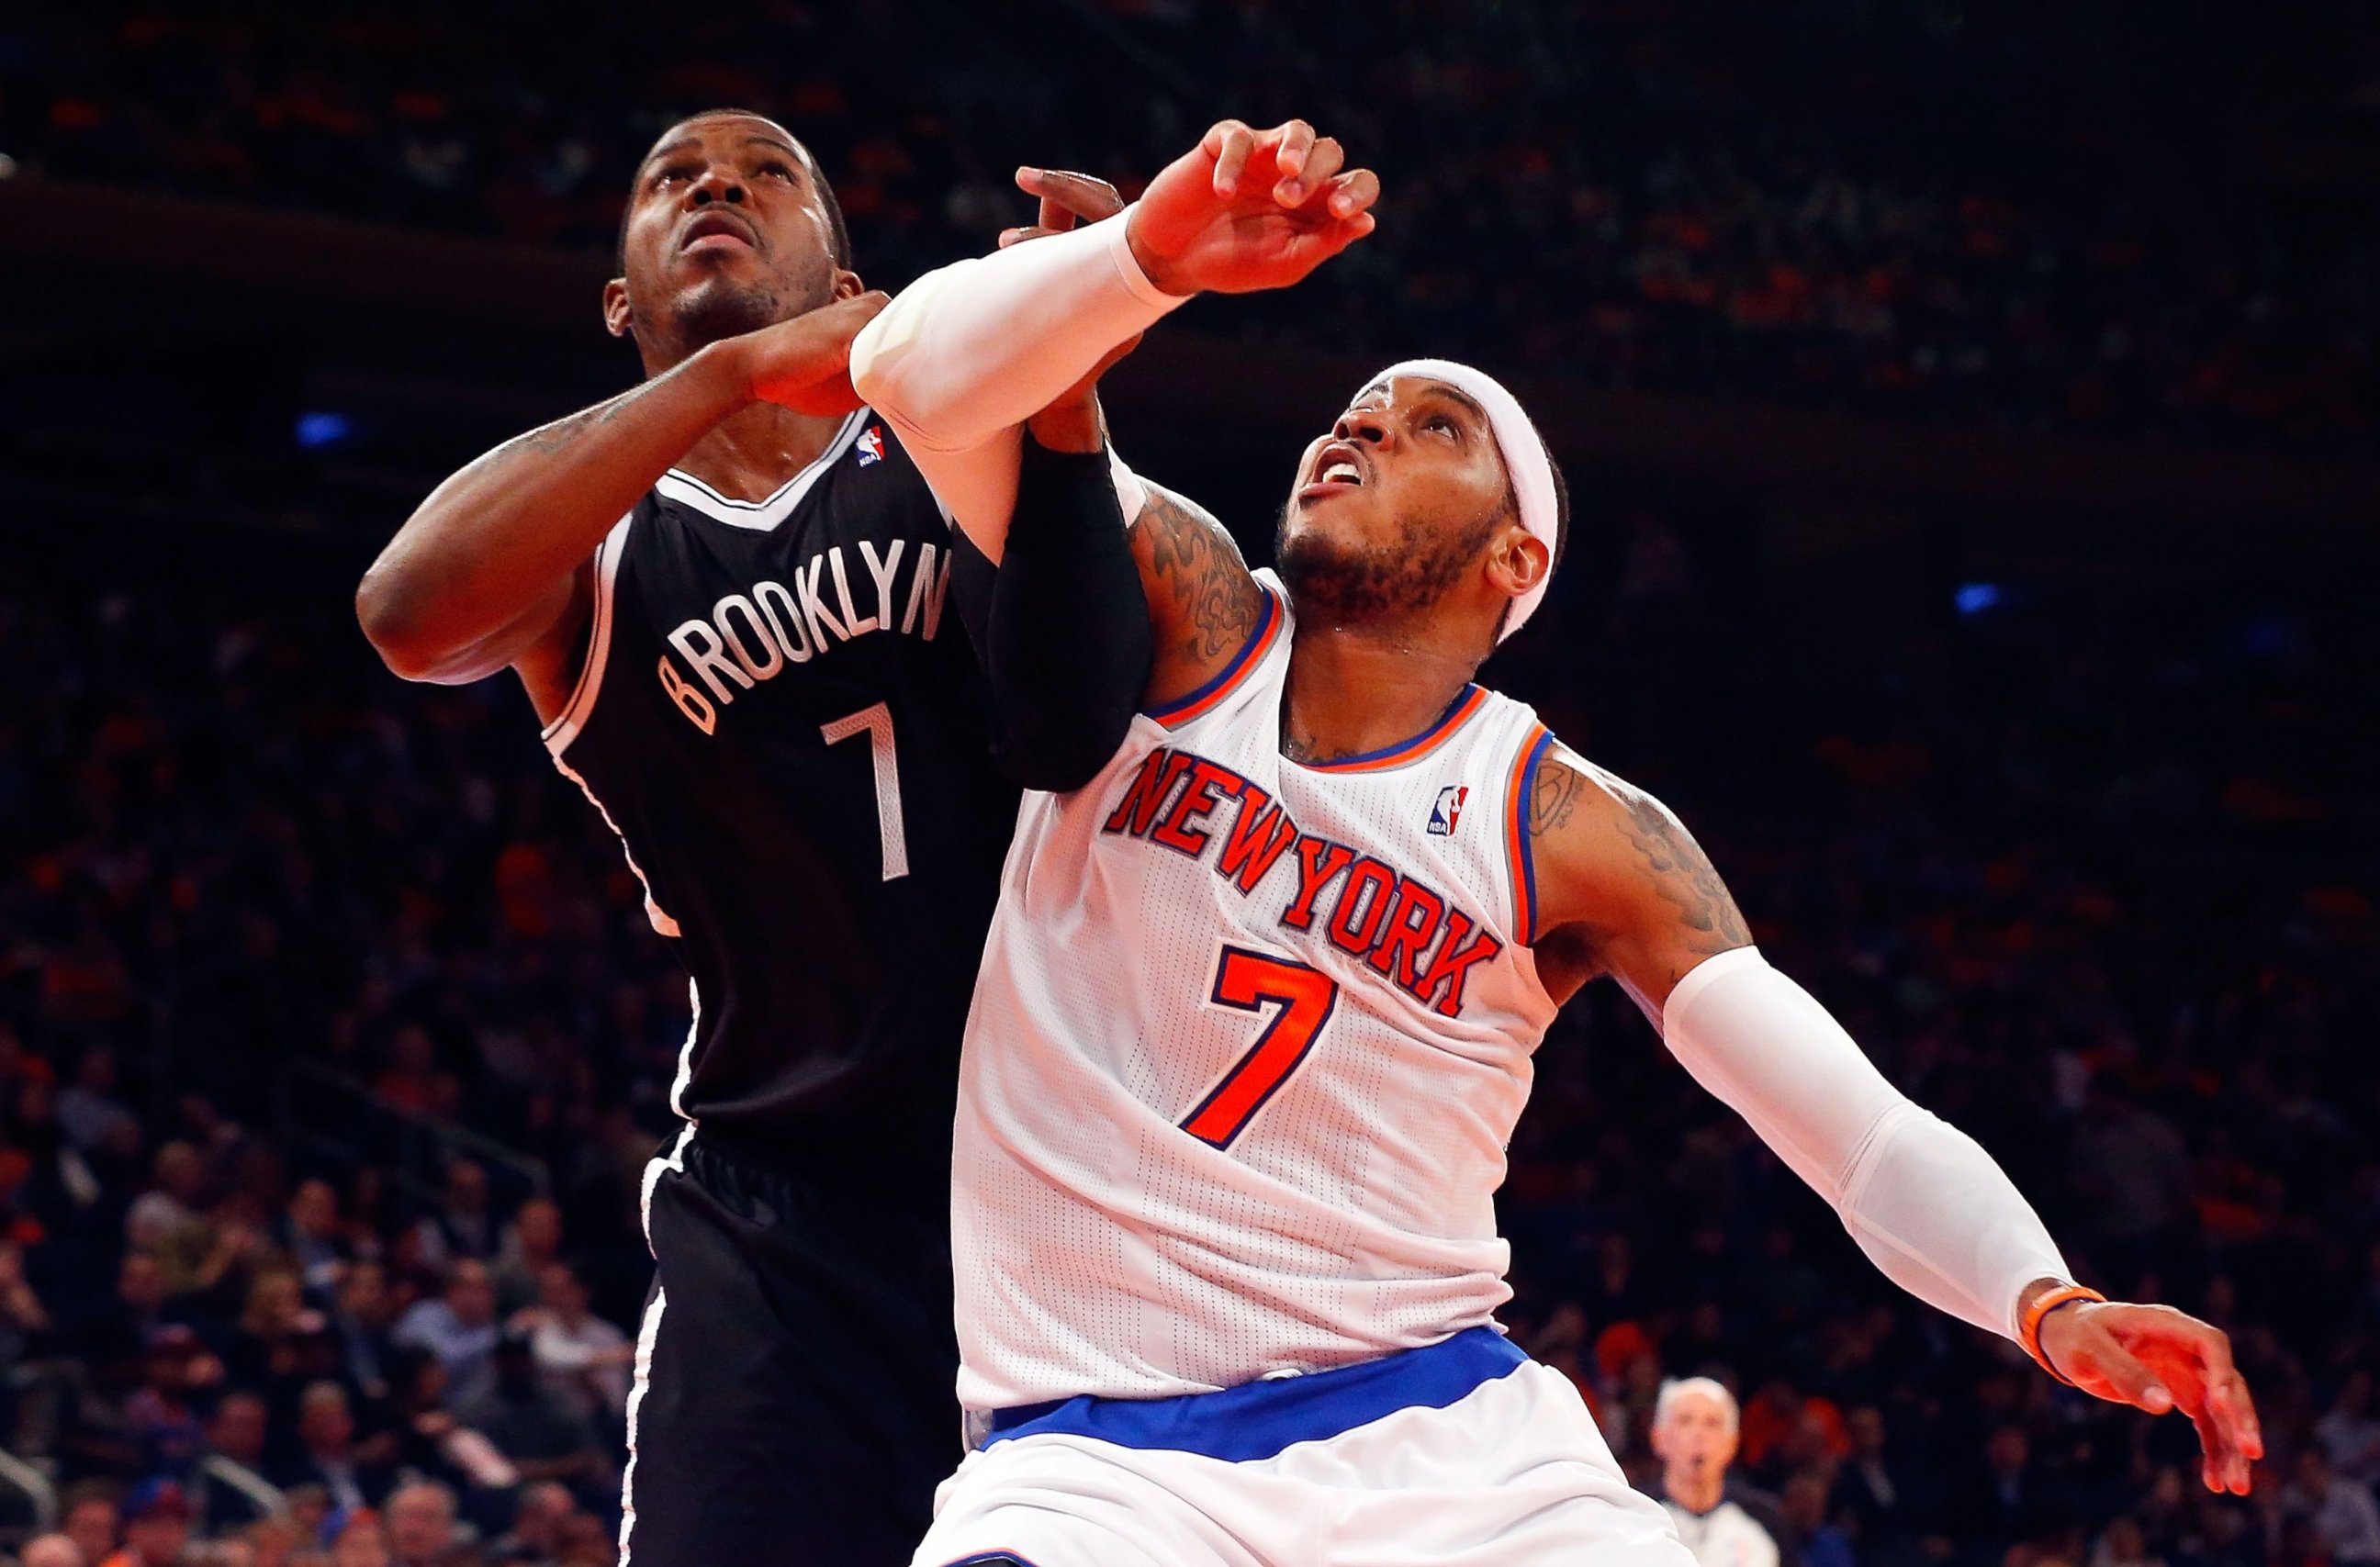 PHOTO: Carmelo Anthony #7 of the New York Knicks in action against Joe Johnson #7 of the Brooklyn Nets at Madison Square Garden in this April 2, 2014, file photo in New York City. 